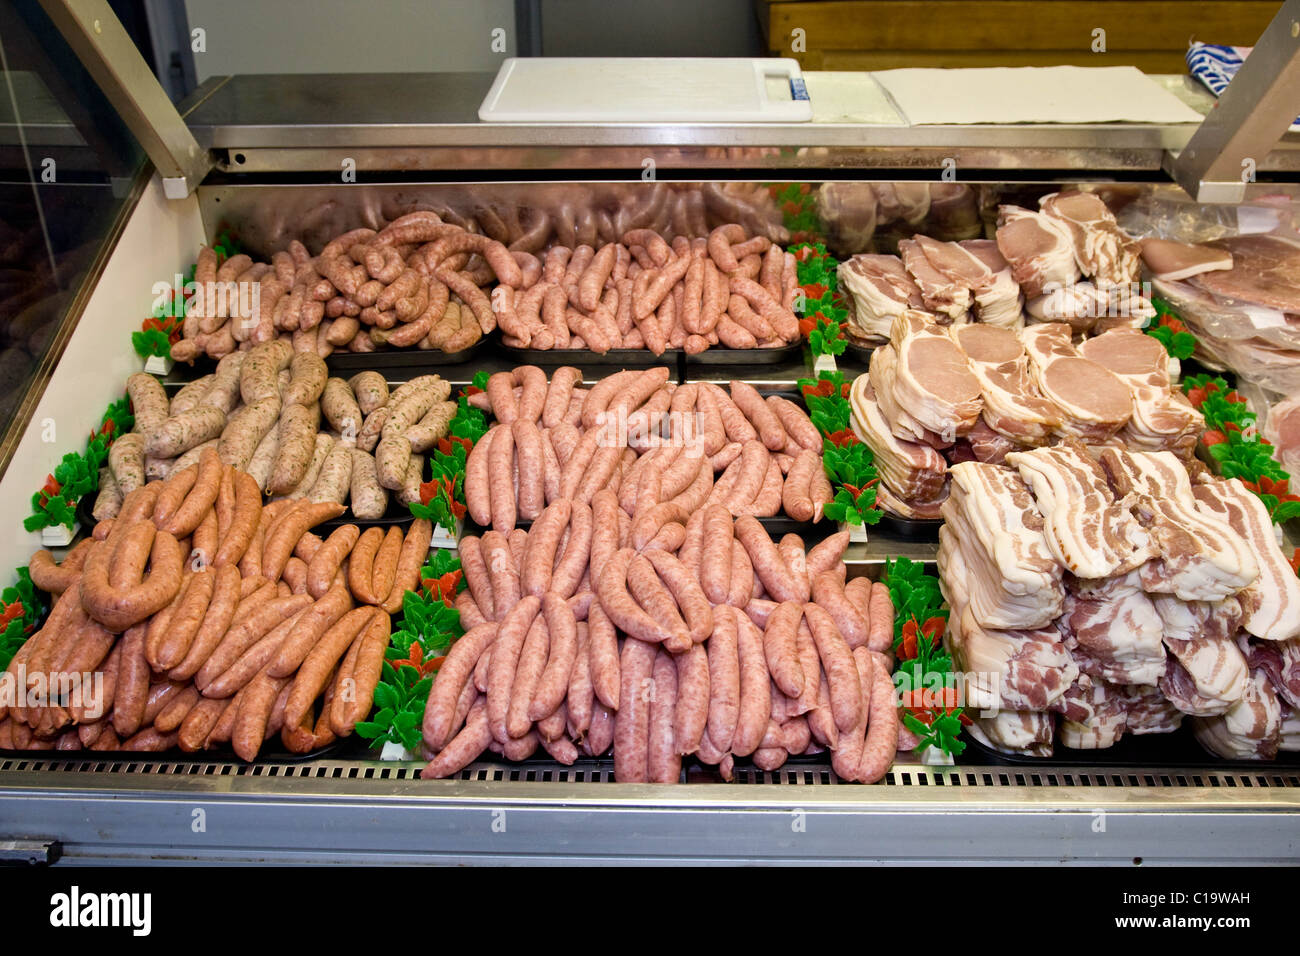 Sausage and Bacon on display in a butchers shop Stock Photo